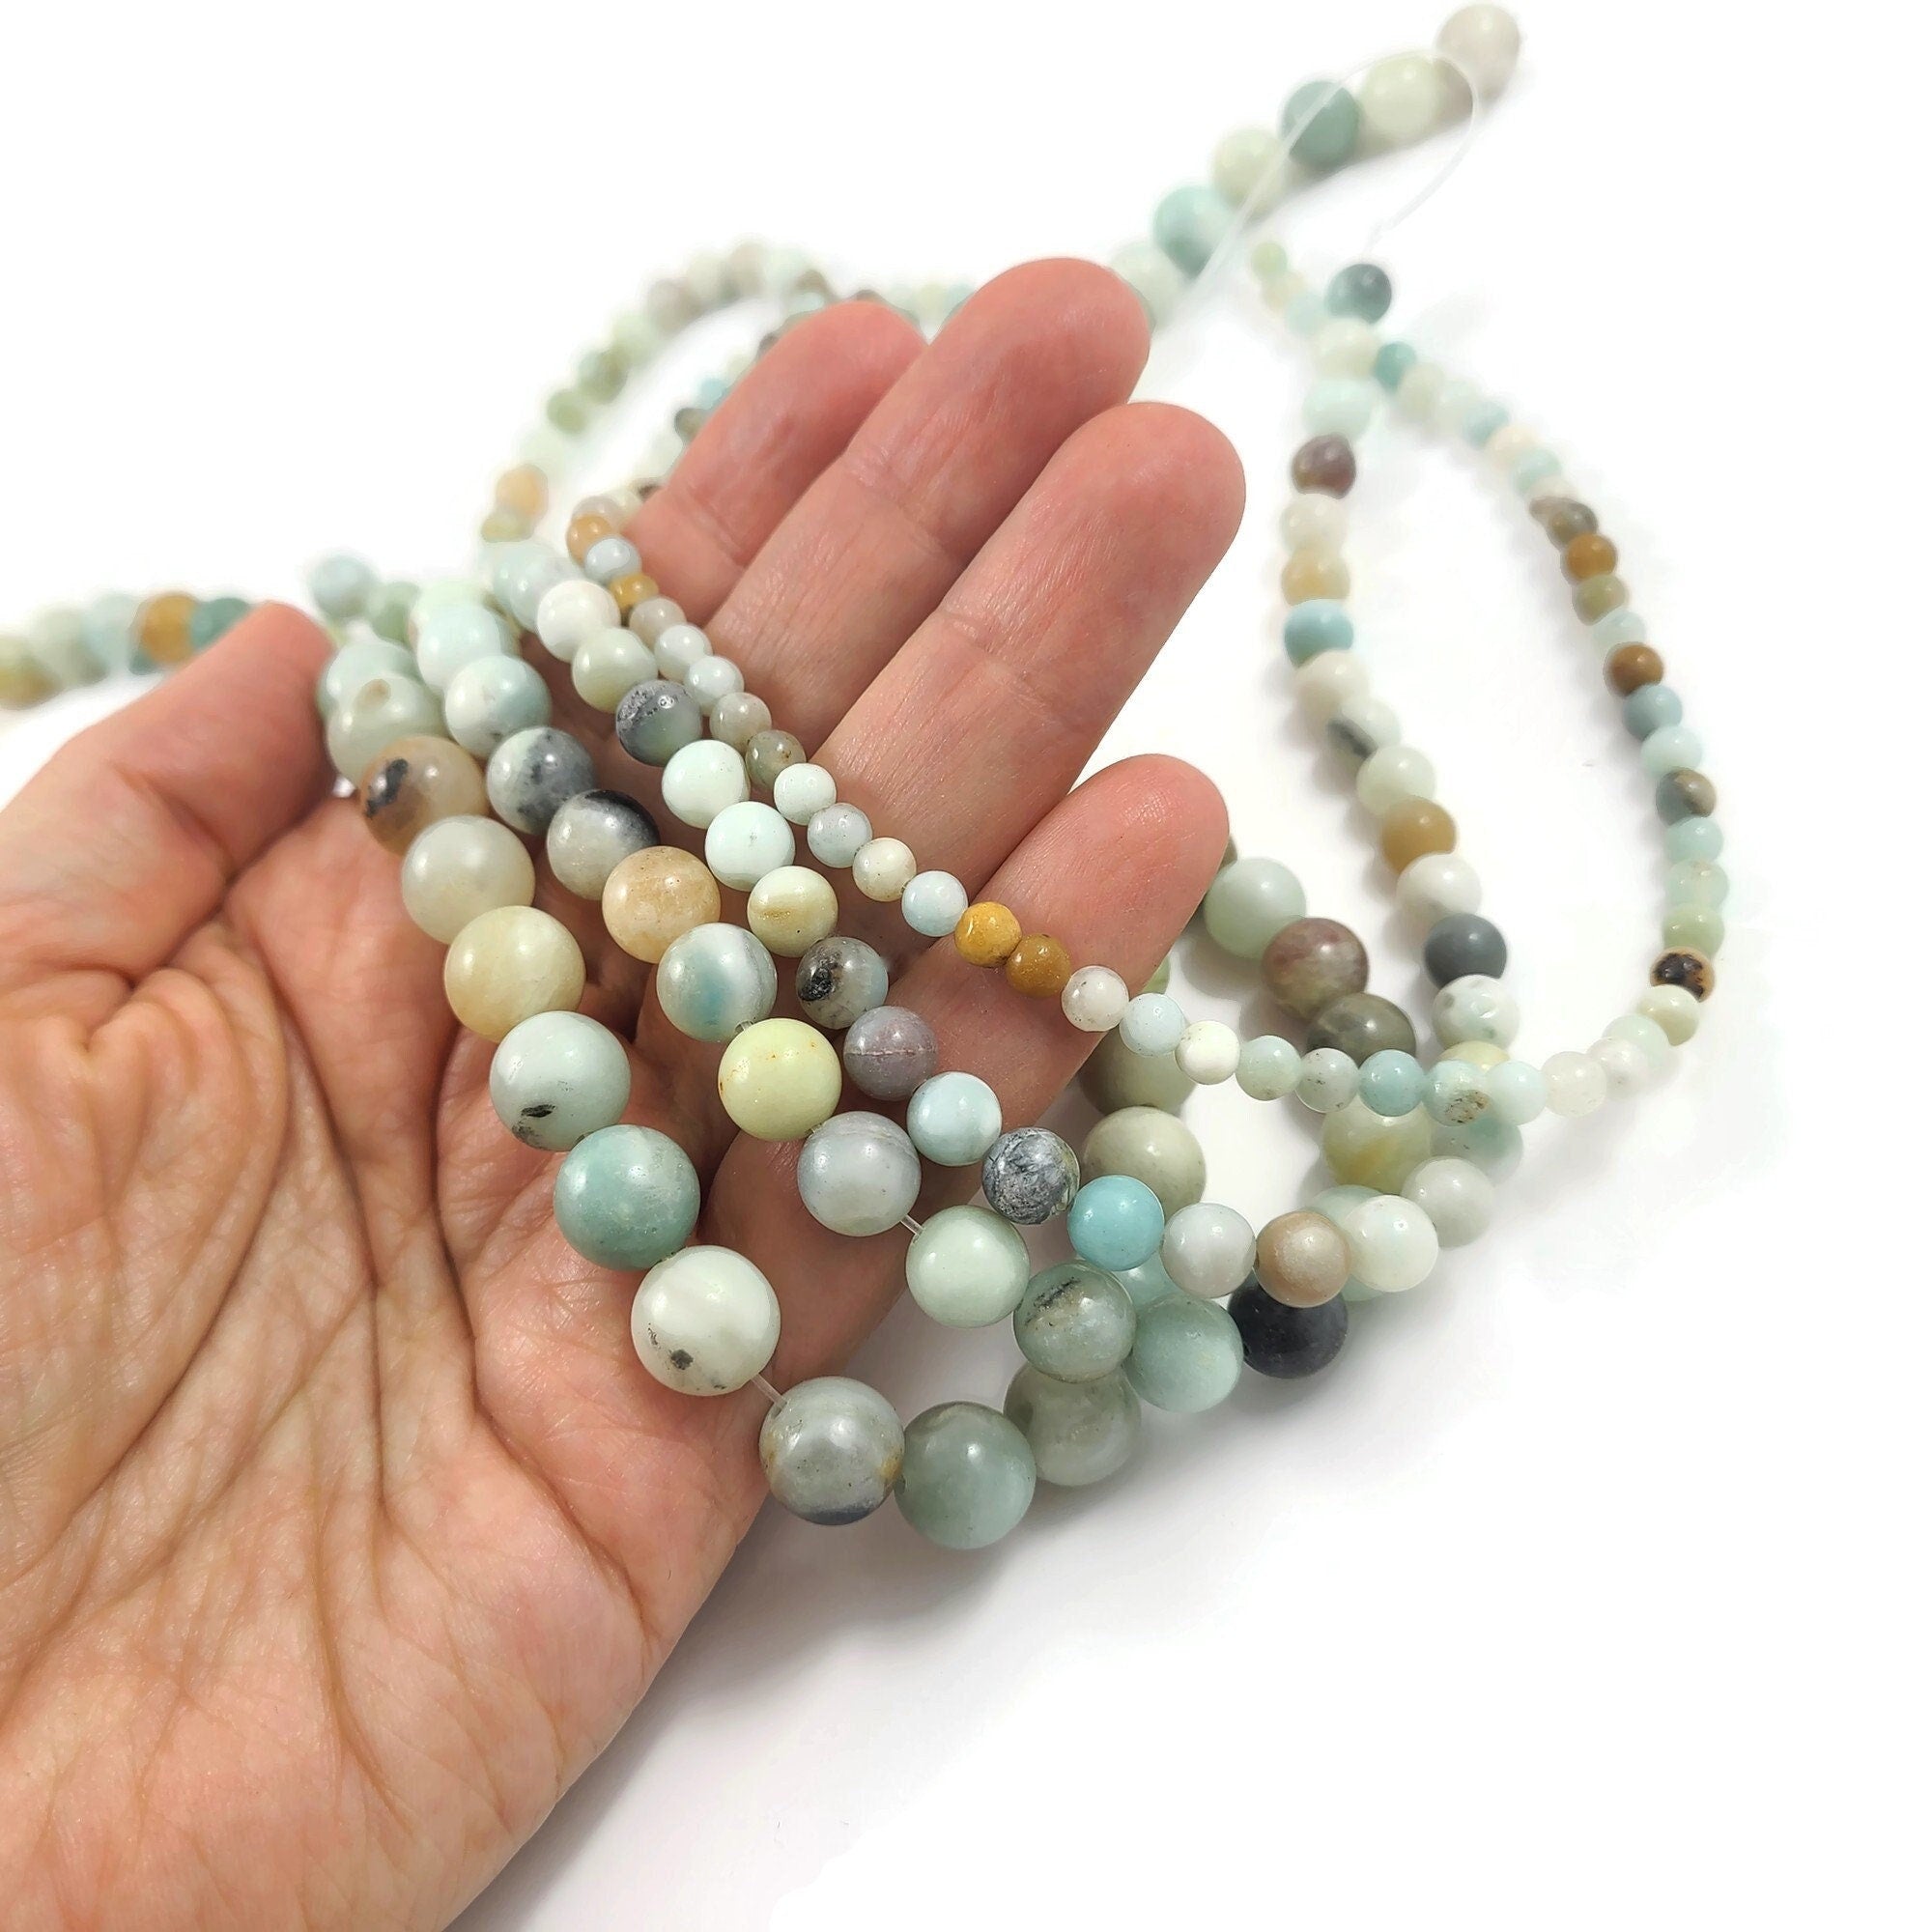 Big Hole Glass Beads, Free and Fast Shipping & Ready Stock Beads. Glass  Beads and Jewelry Beads Wholesale Supplier. Beads Supplier & Wholesale Bead  manufacturer of Gemstone Beads, Glass Beads, Wooden 